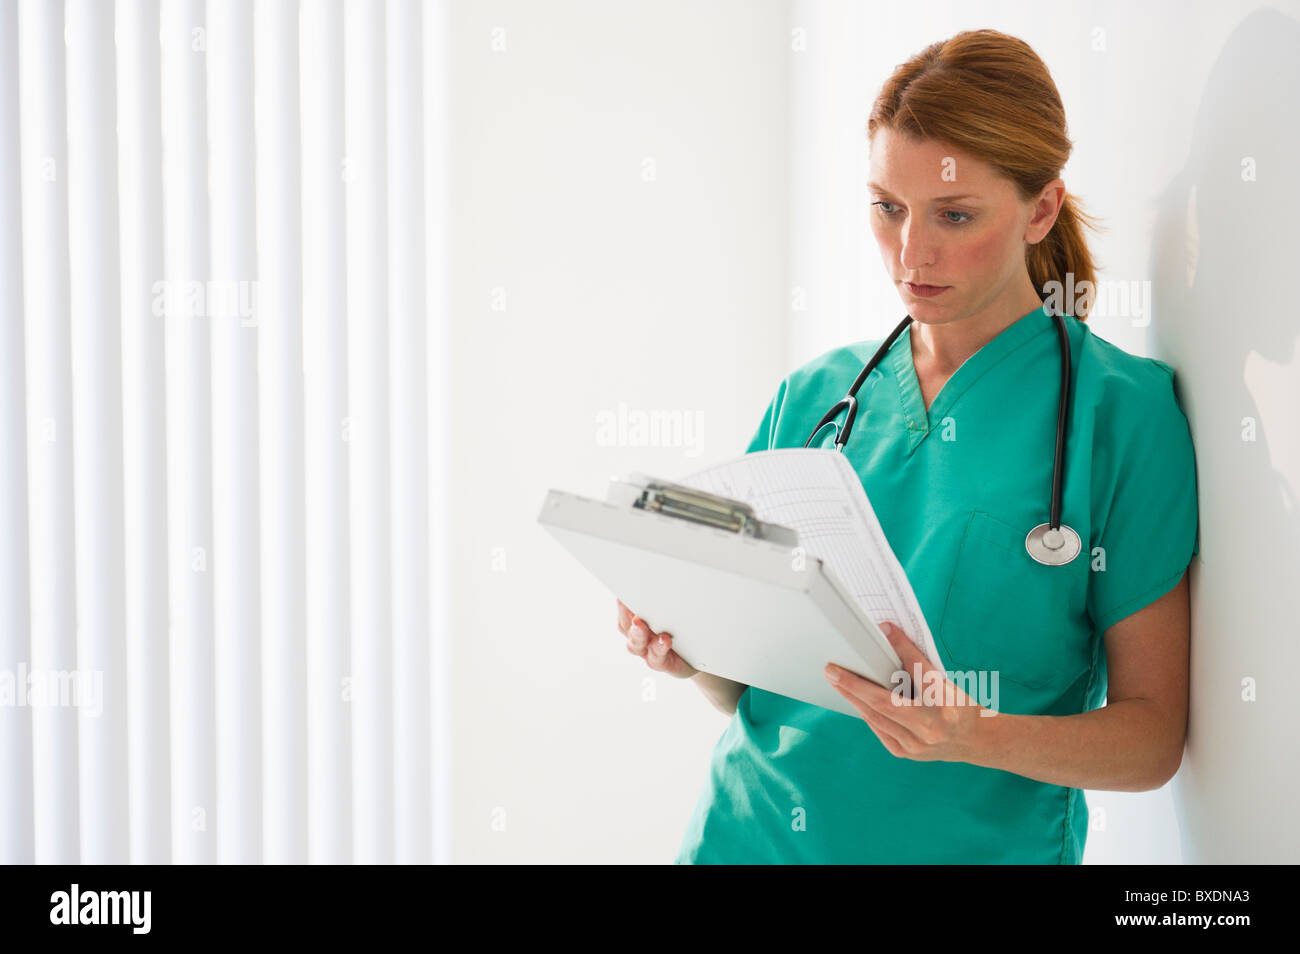 Healthcare worker looking at medical chart Stock Photo